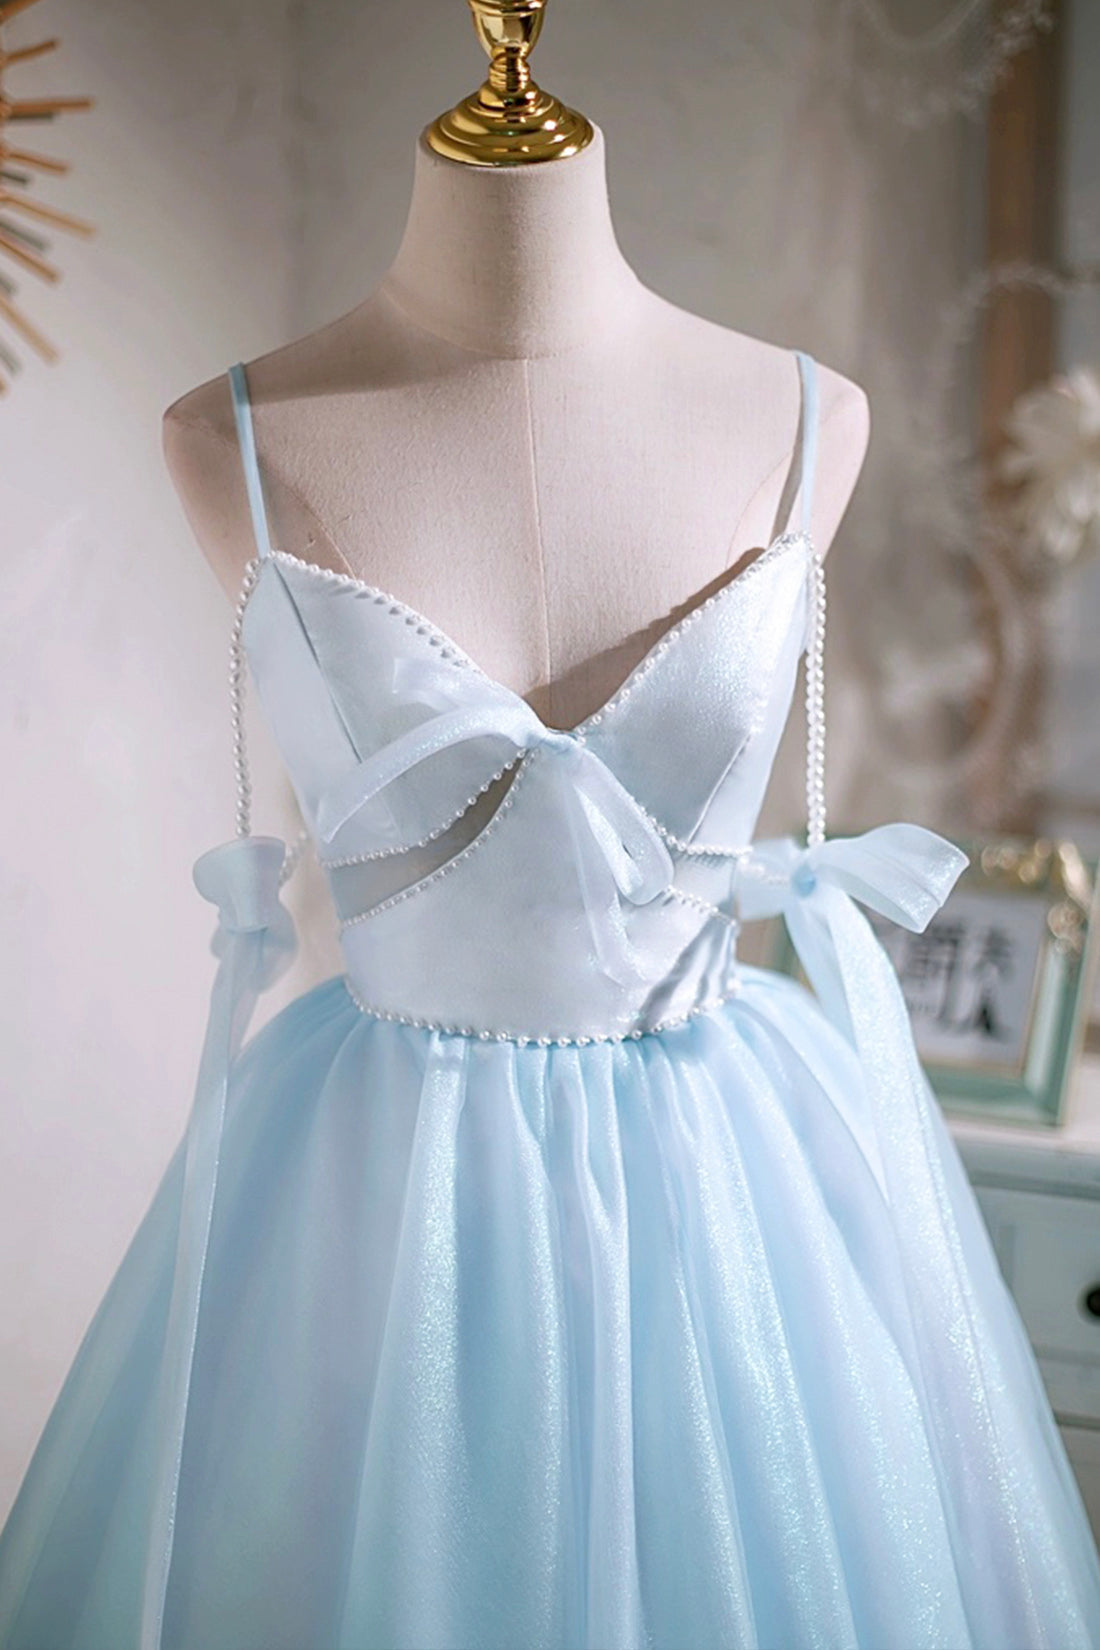 Prom Dressed Long, Sky Blue Spaghetti Straps Party Dress, Cute A-Line Tulle Homecoming Dress